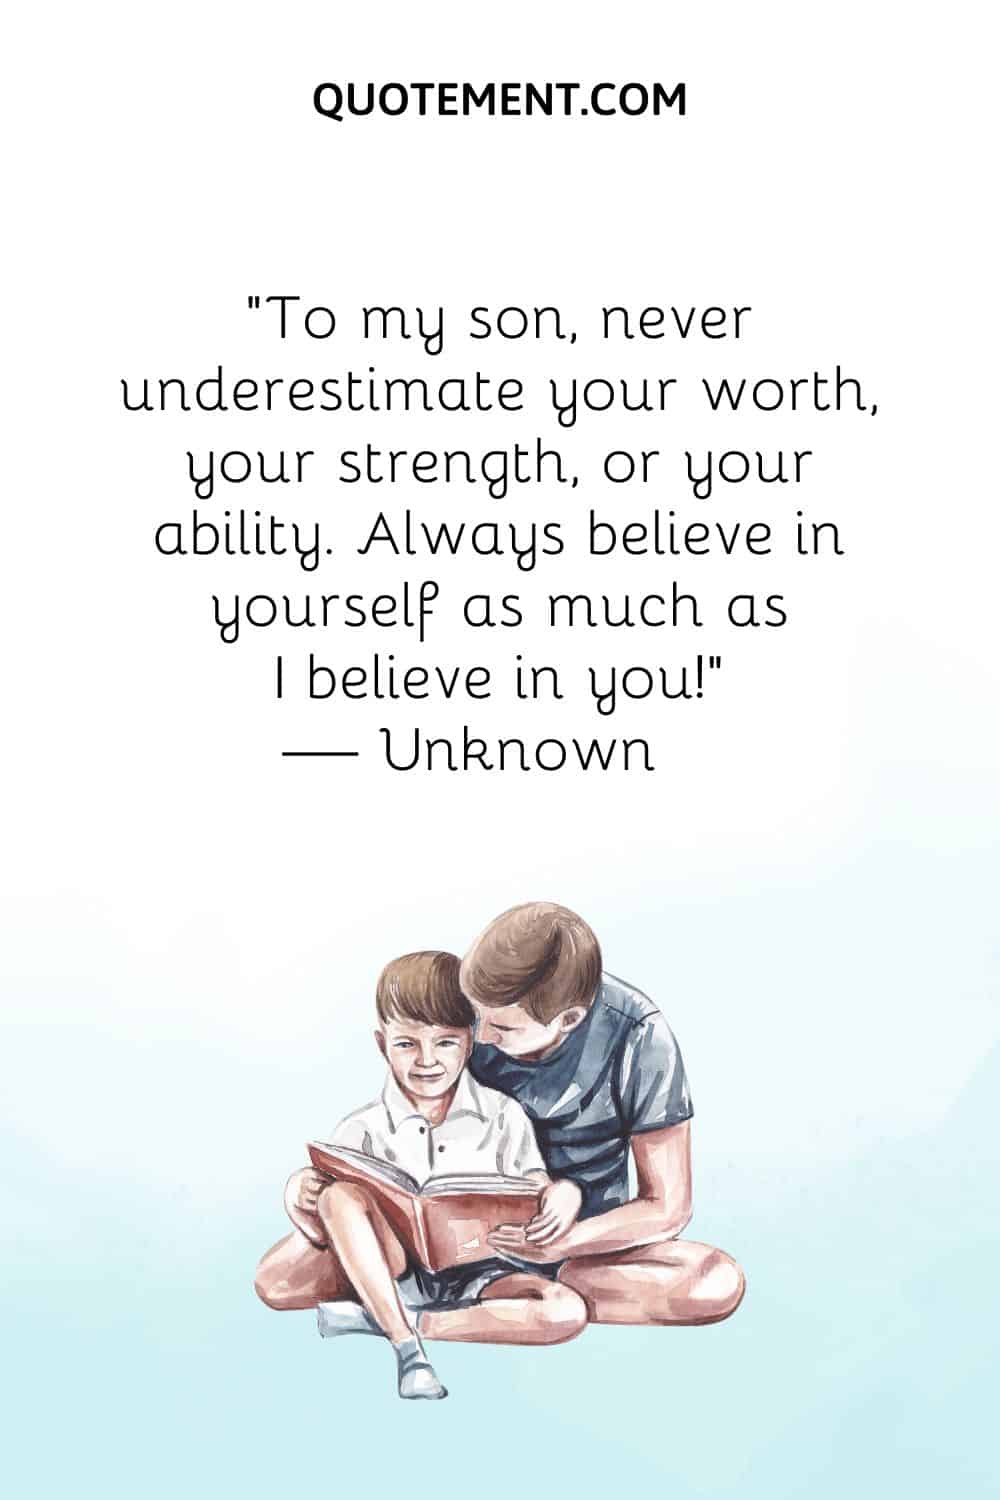 To my son, never underestimate your worth, your strength, or your ability.